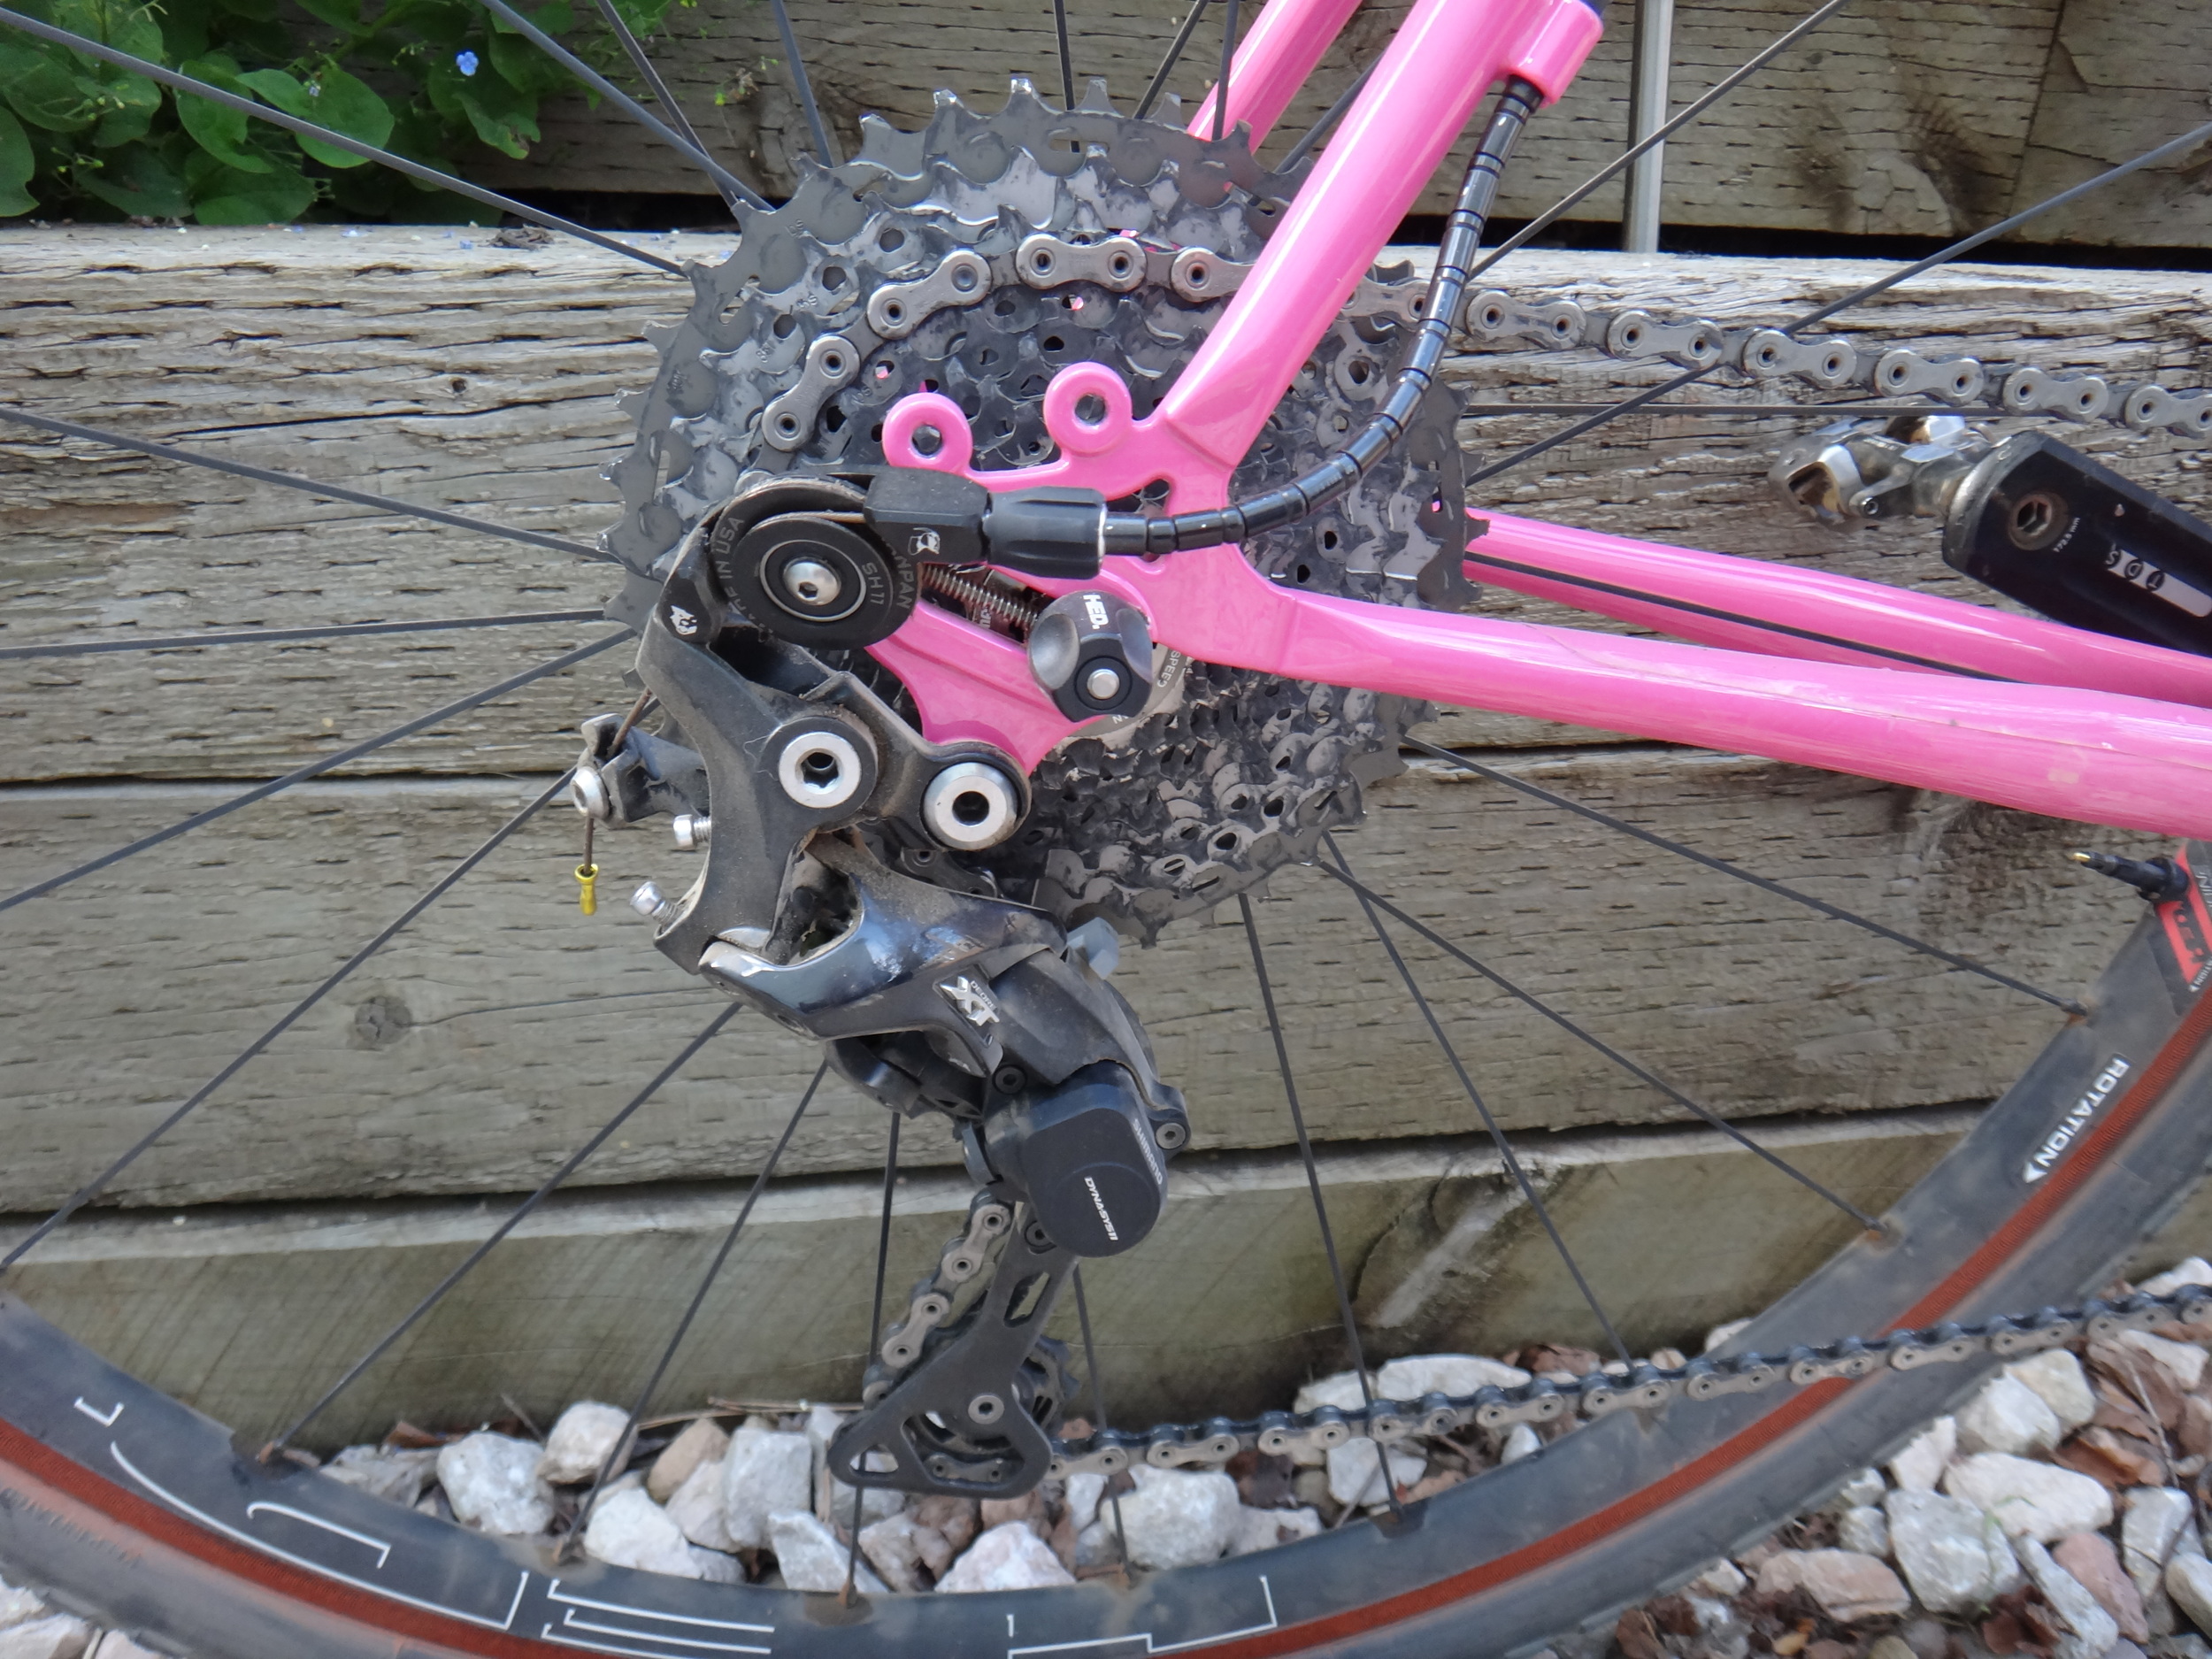 road shifters with mtb derailleur